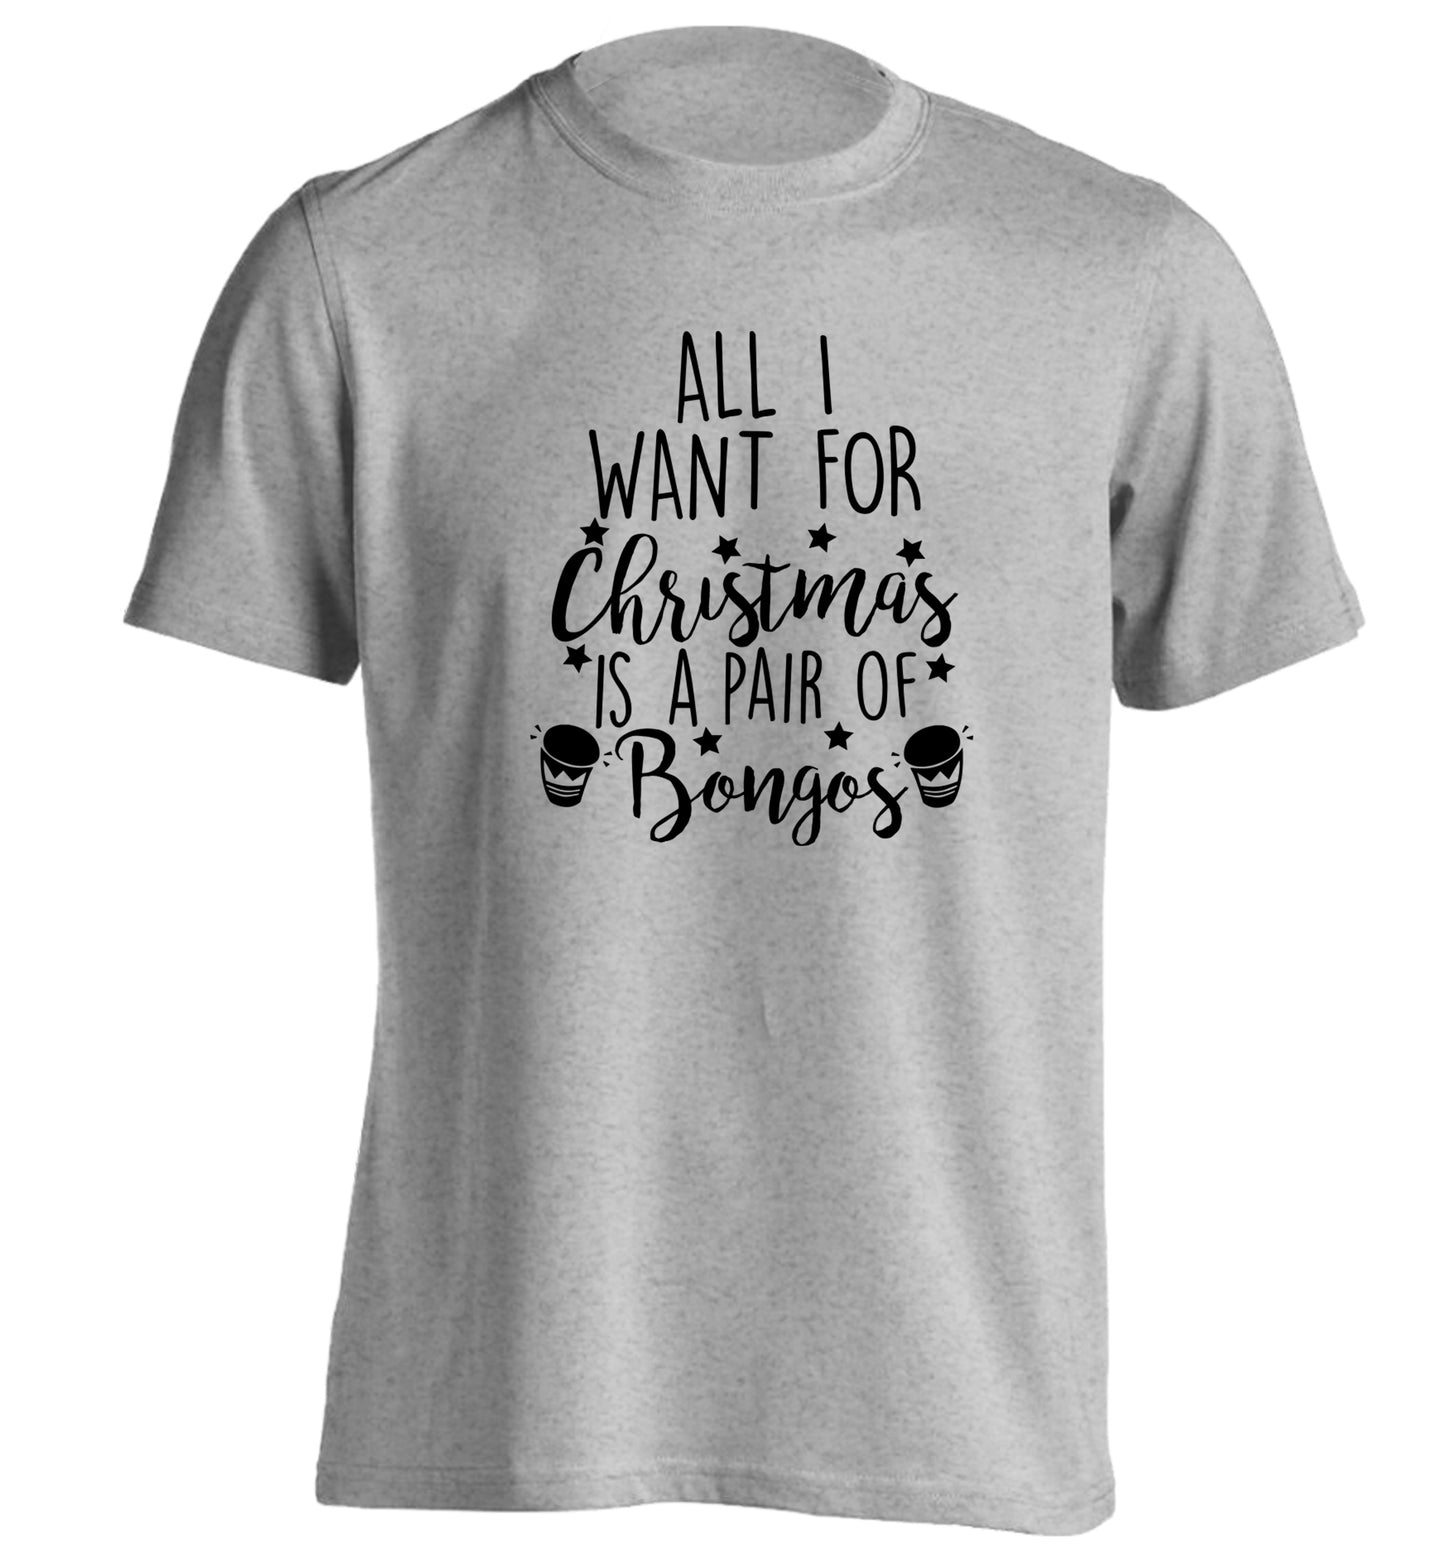 All I want for Christmas is a pair of bongos! adults unisex grey Tshirt 2XL